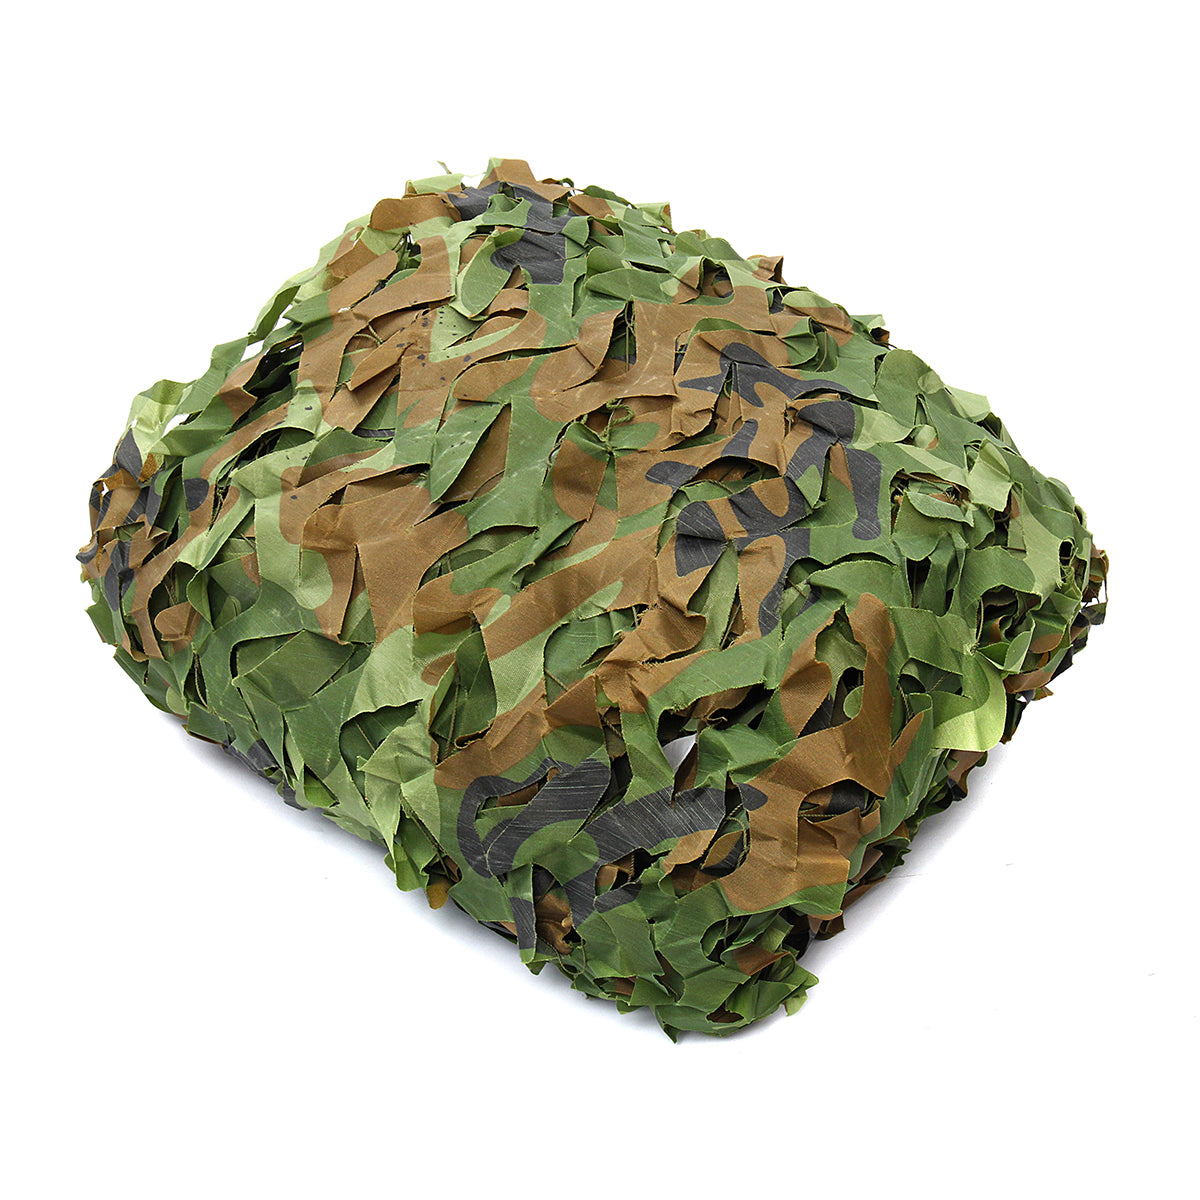 1.5mX6m Jungle Camo Netting Camouflage Net for Car Cover Camping Woodland Military Hunting